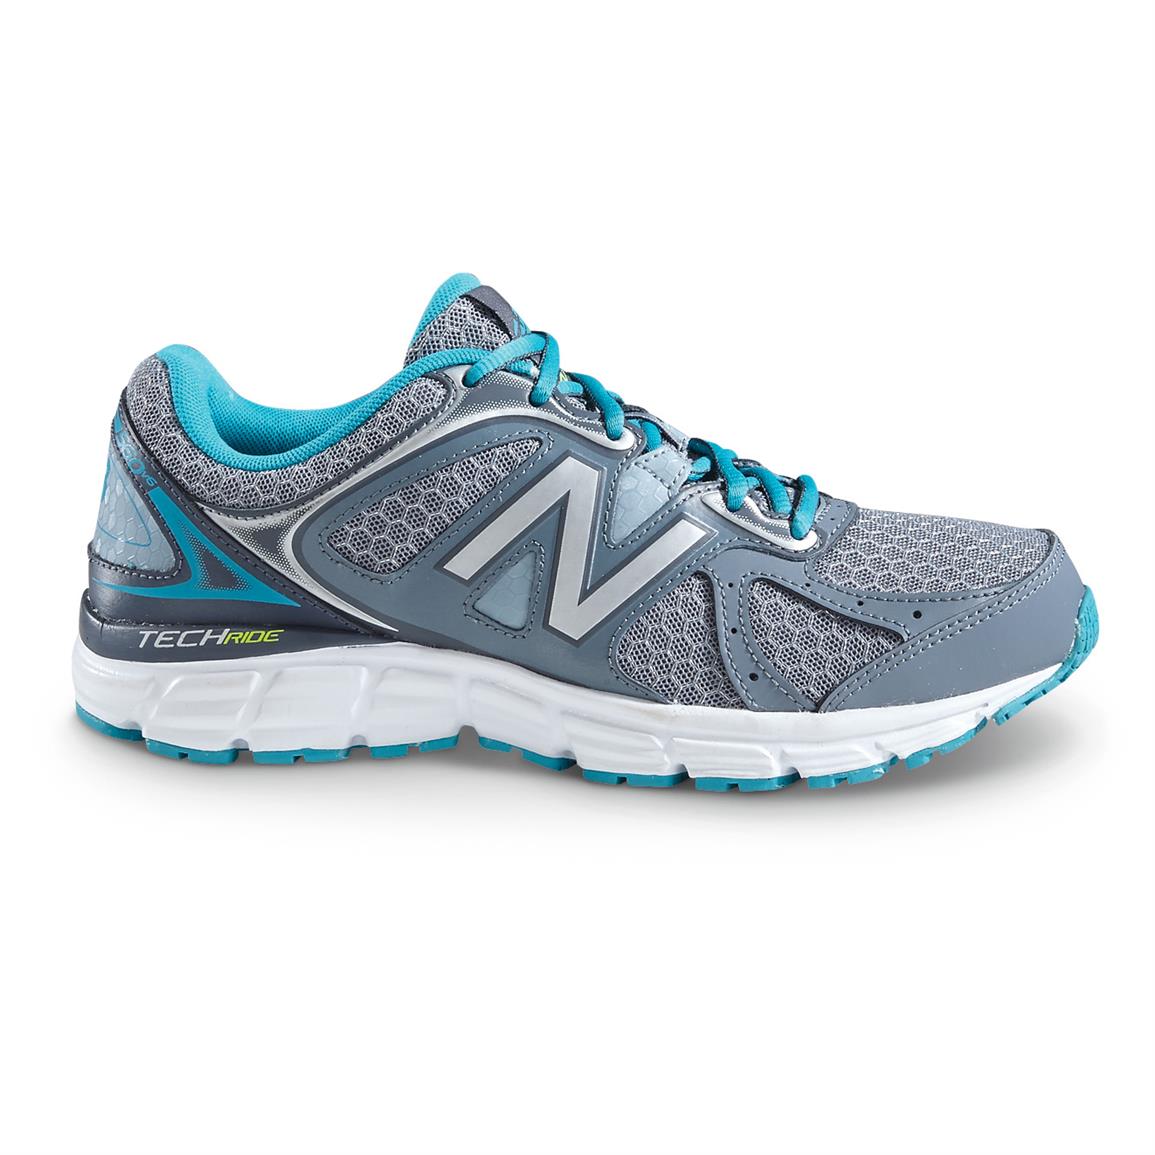 View New New Balance Shoes Pictures - Daily Shoes Update